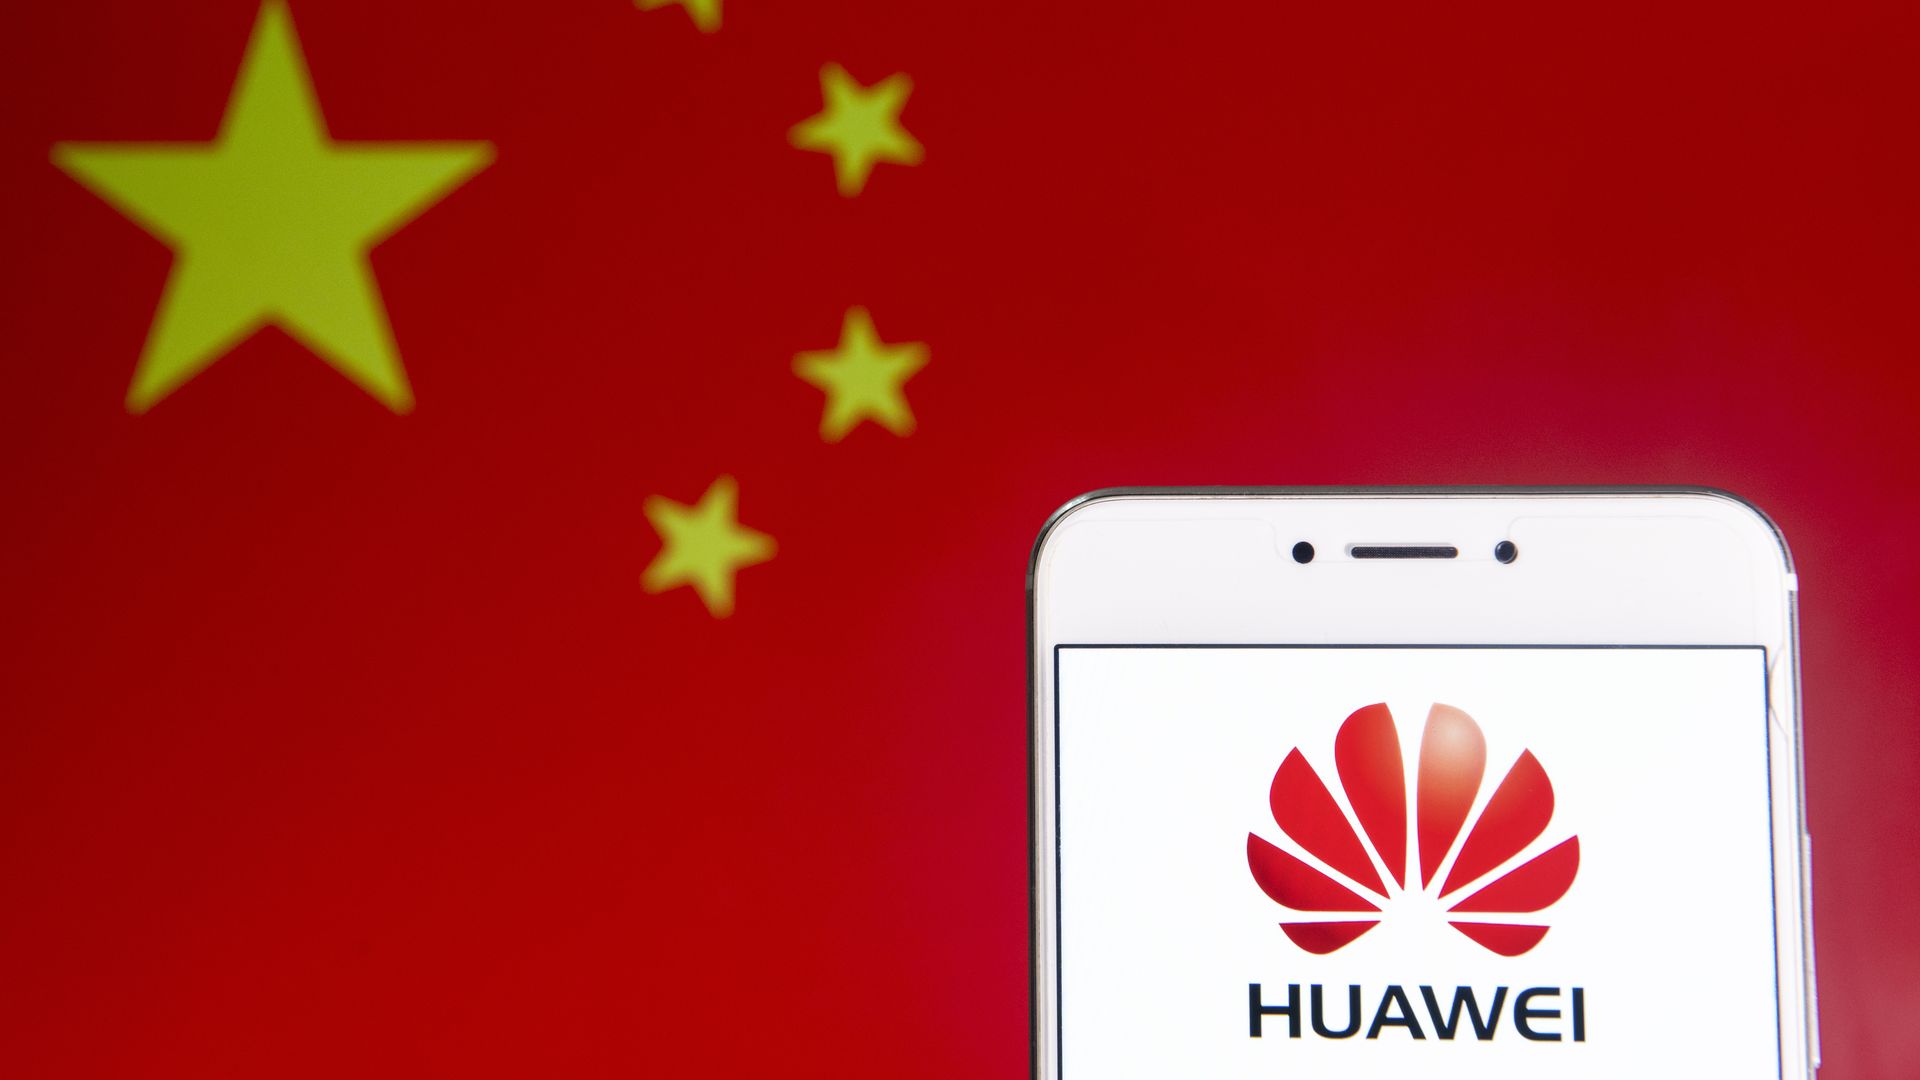 Huawei logo on a phone screen in front of the Chinese flag